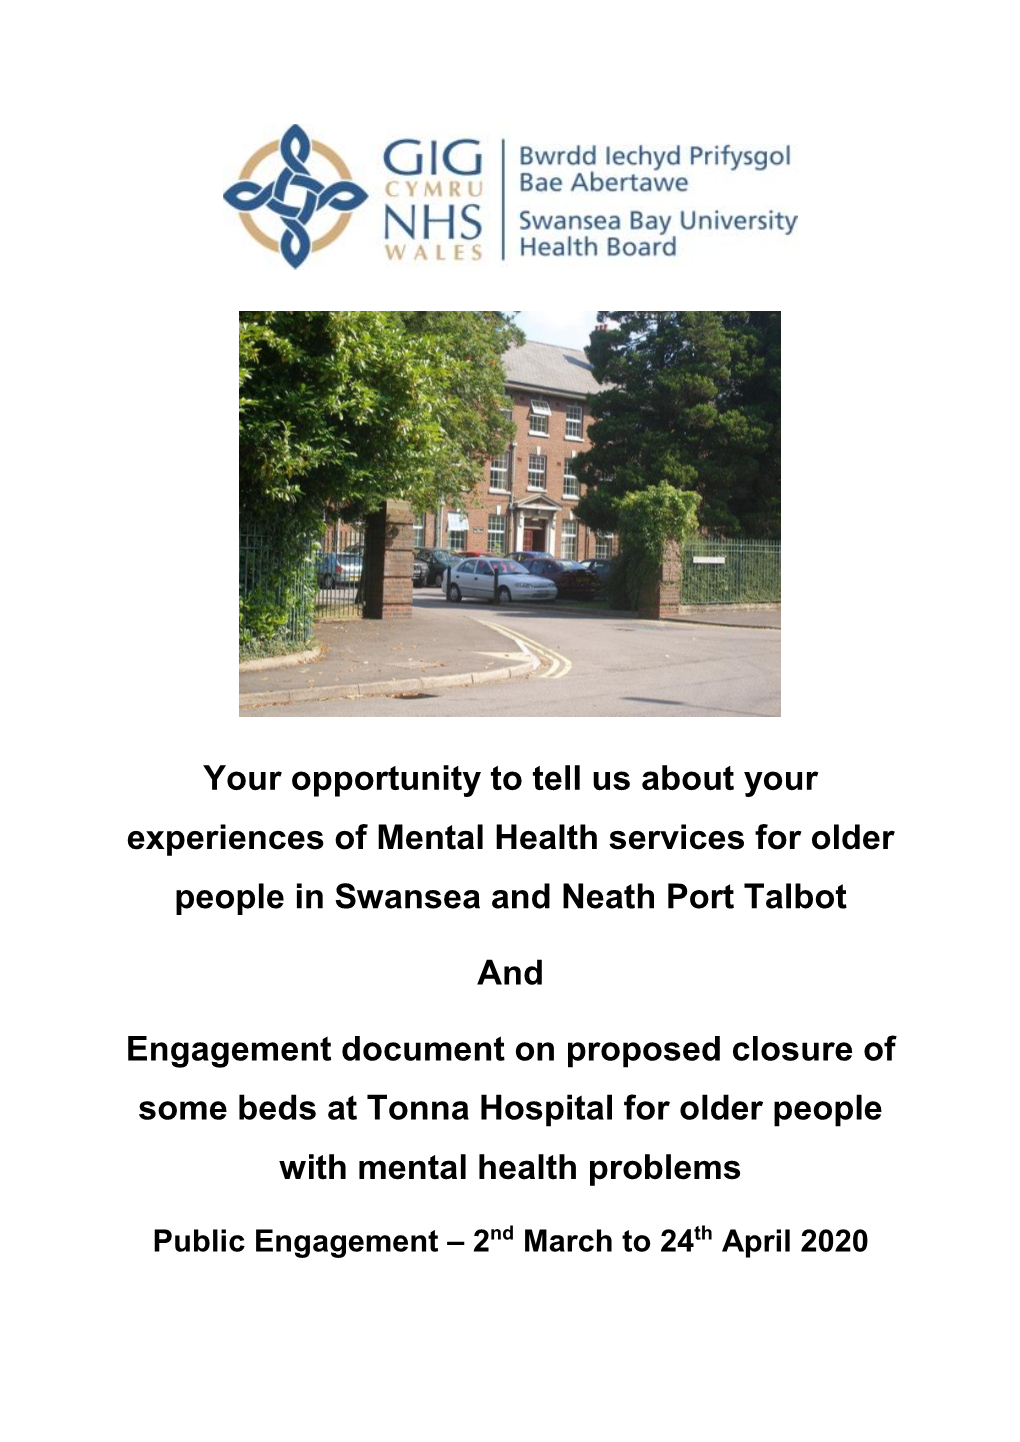 Your Opportunity to Tell Us About Your Experiences of Mental Health Services for Older People in Swansea and Neath Port Talbot